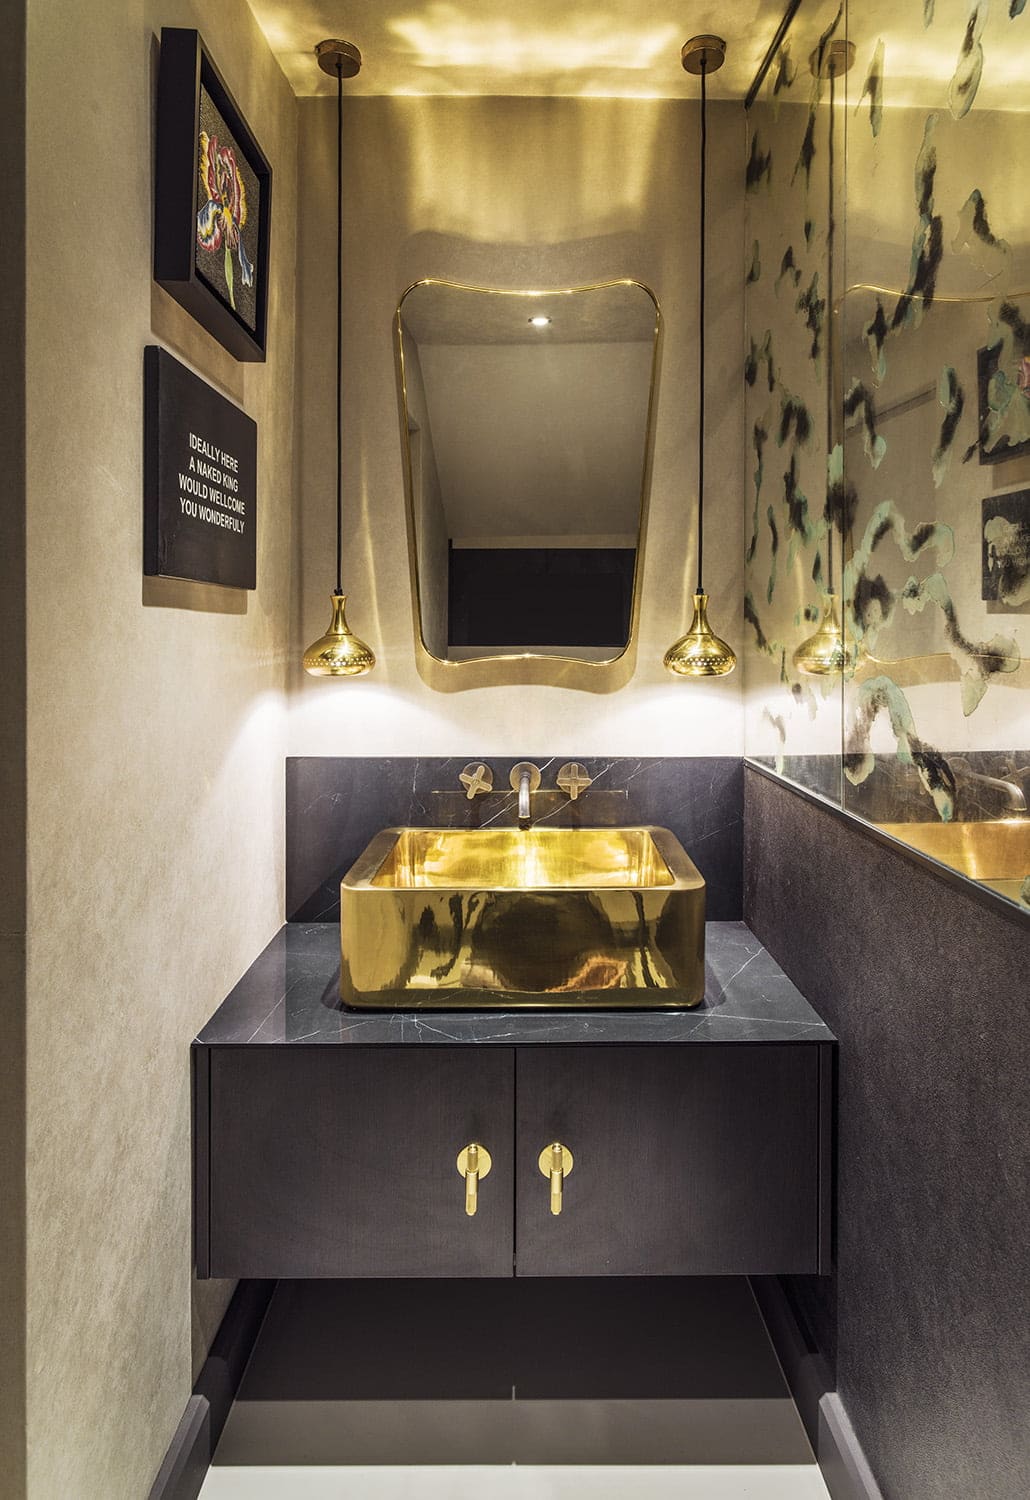 Bathroom of the Week: Dramatic Black Walls and Art Deco Style